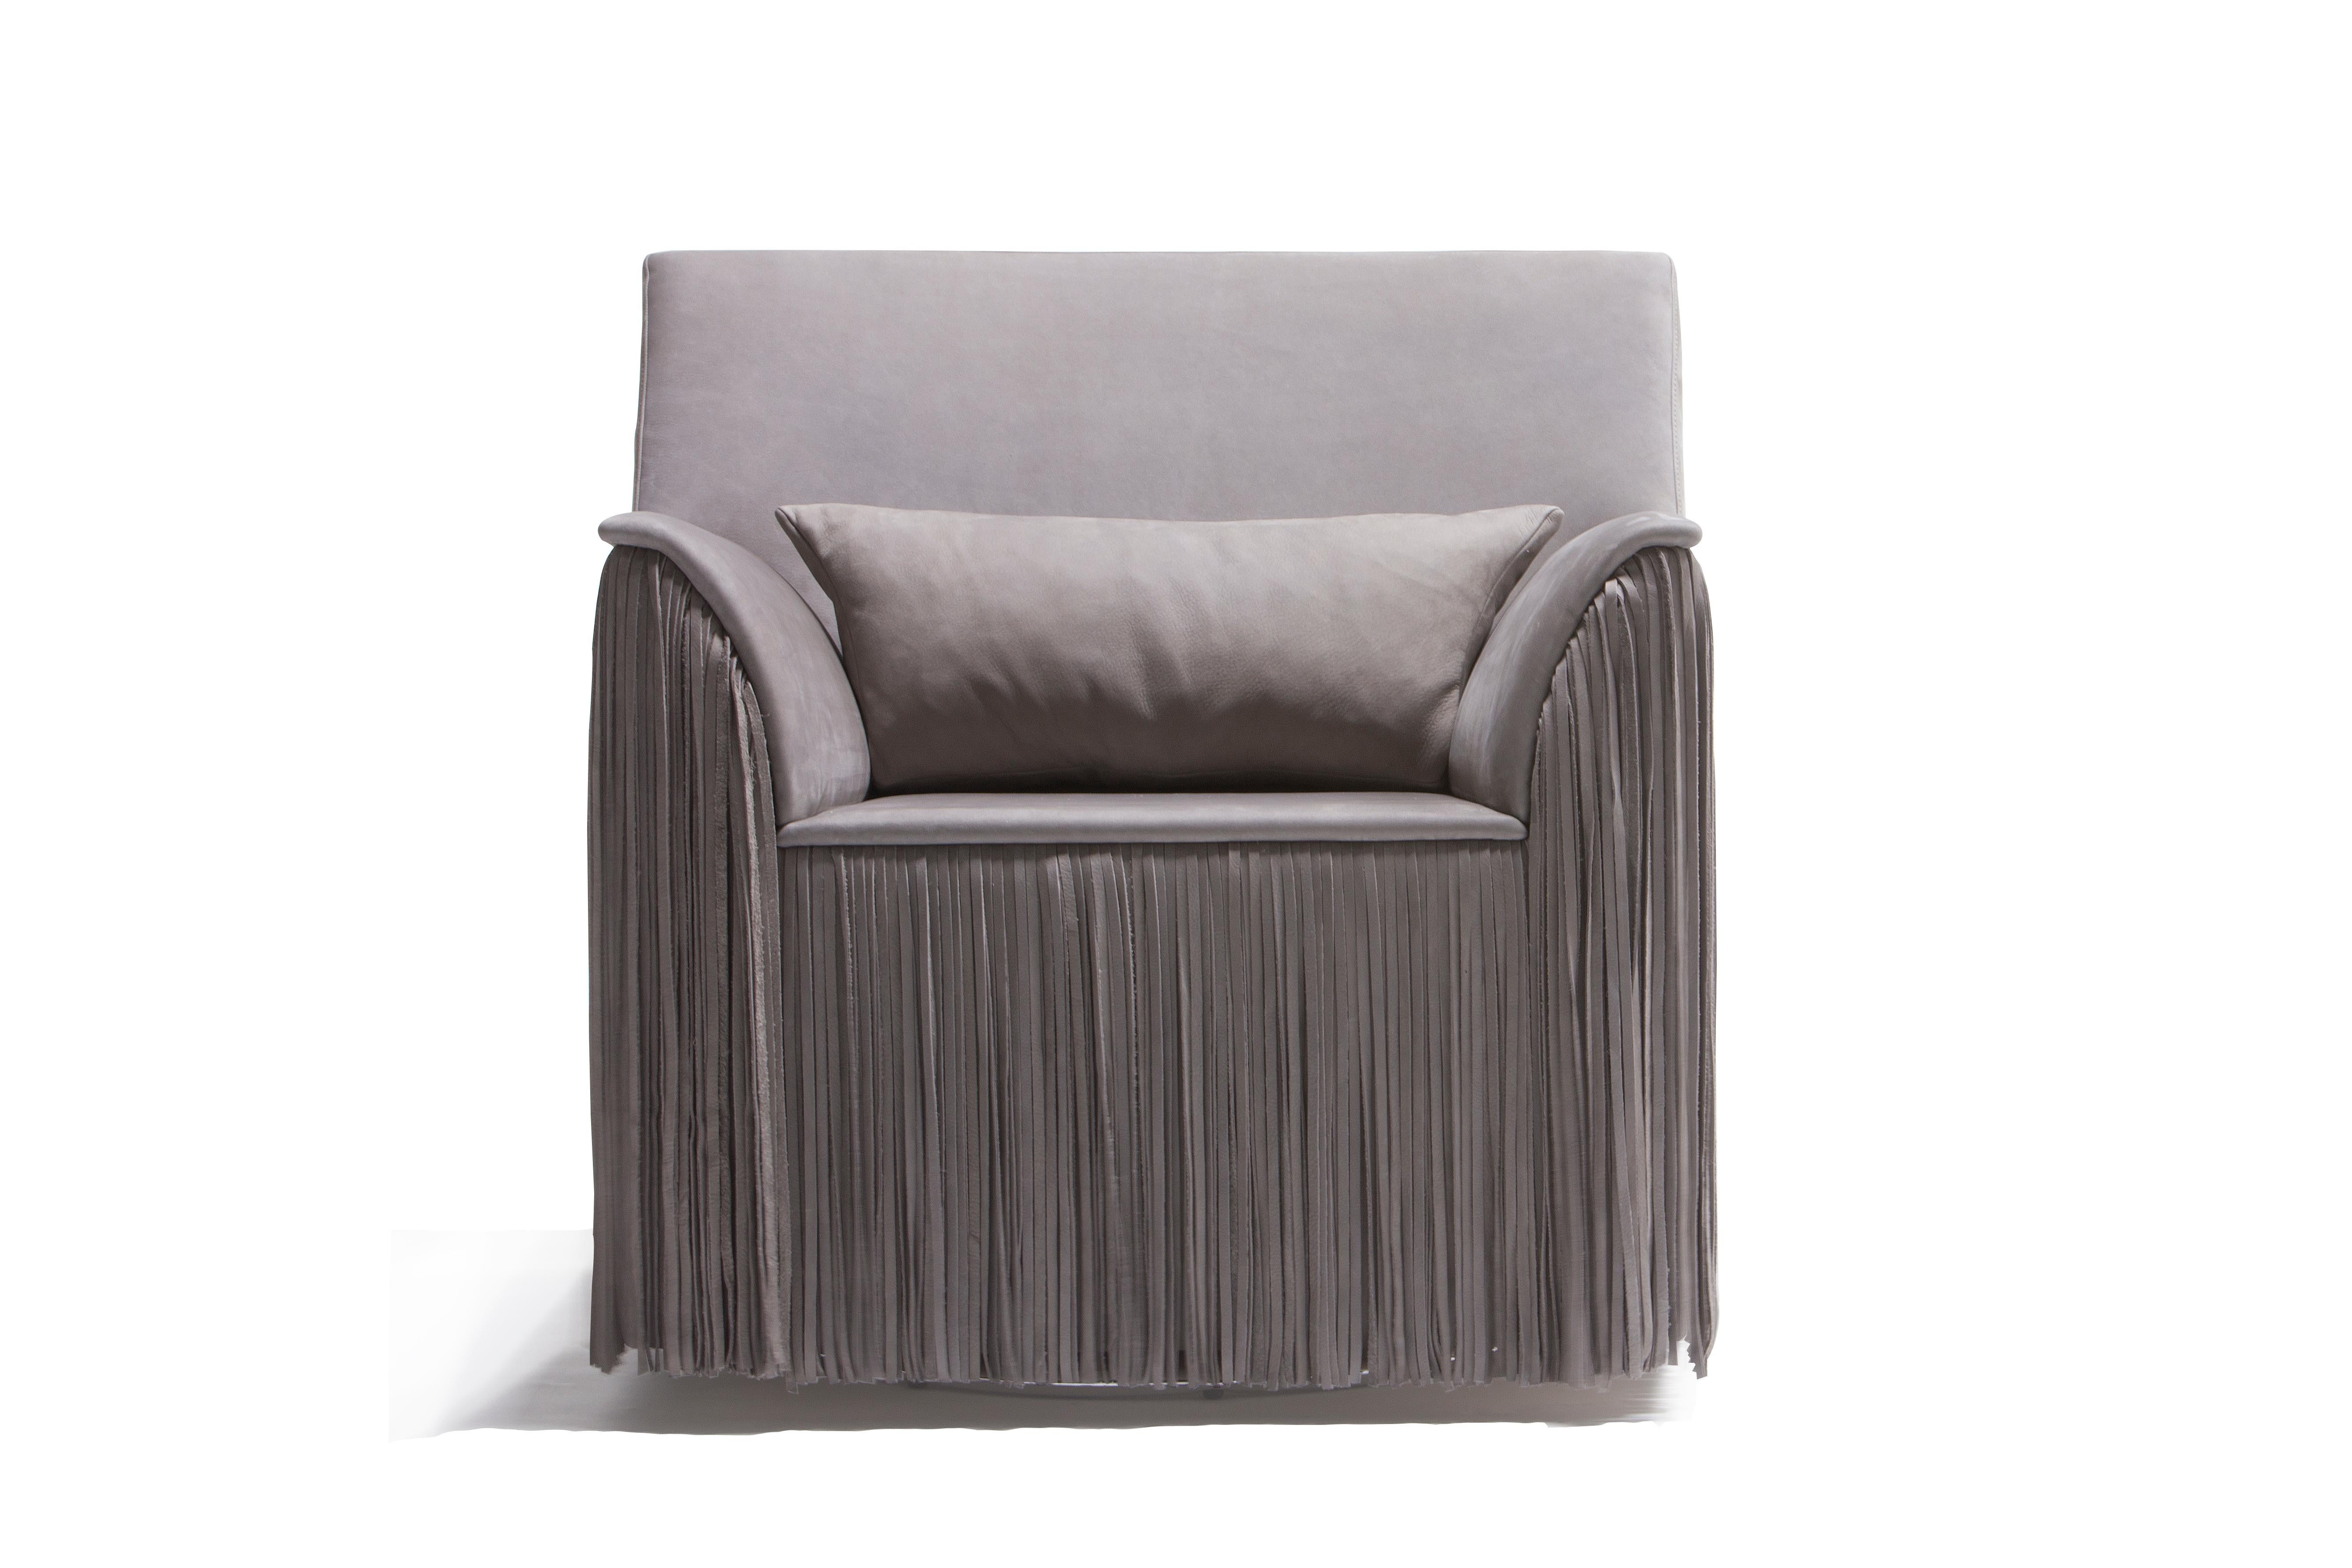 The TAGLIA swivel armchair introduces the timeless fashion element of leather fringes to haute furniture design. The swung armrest and the oversized backrest are surrounded by a dense skirt of nubuck leather fringes that come to life through a